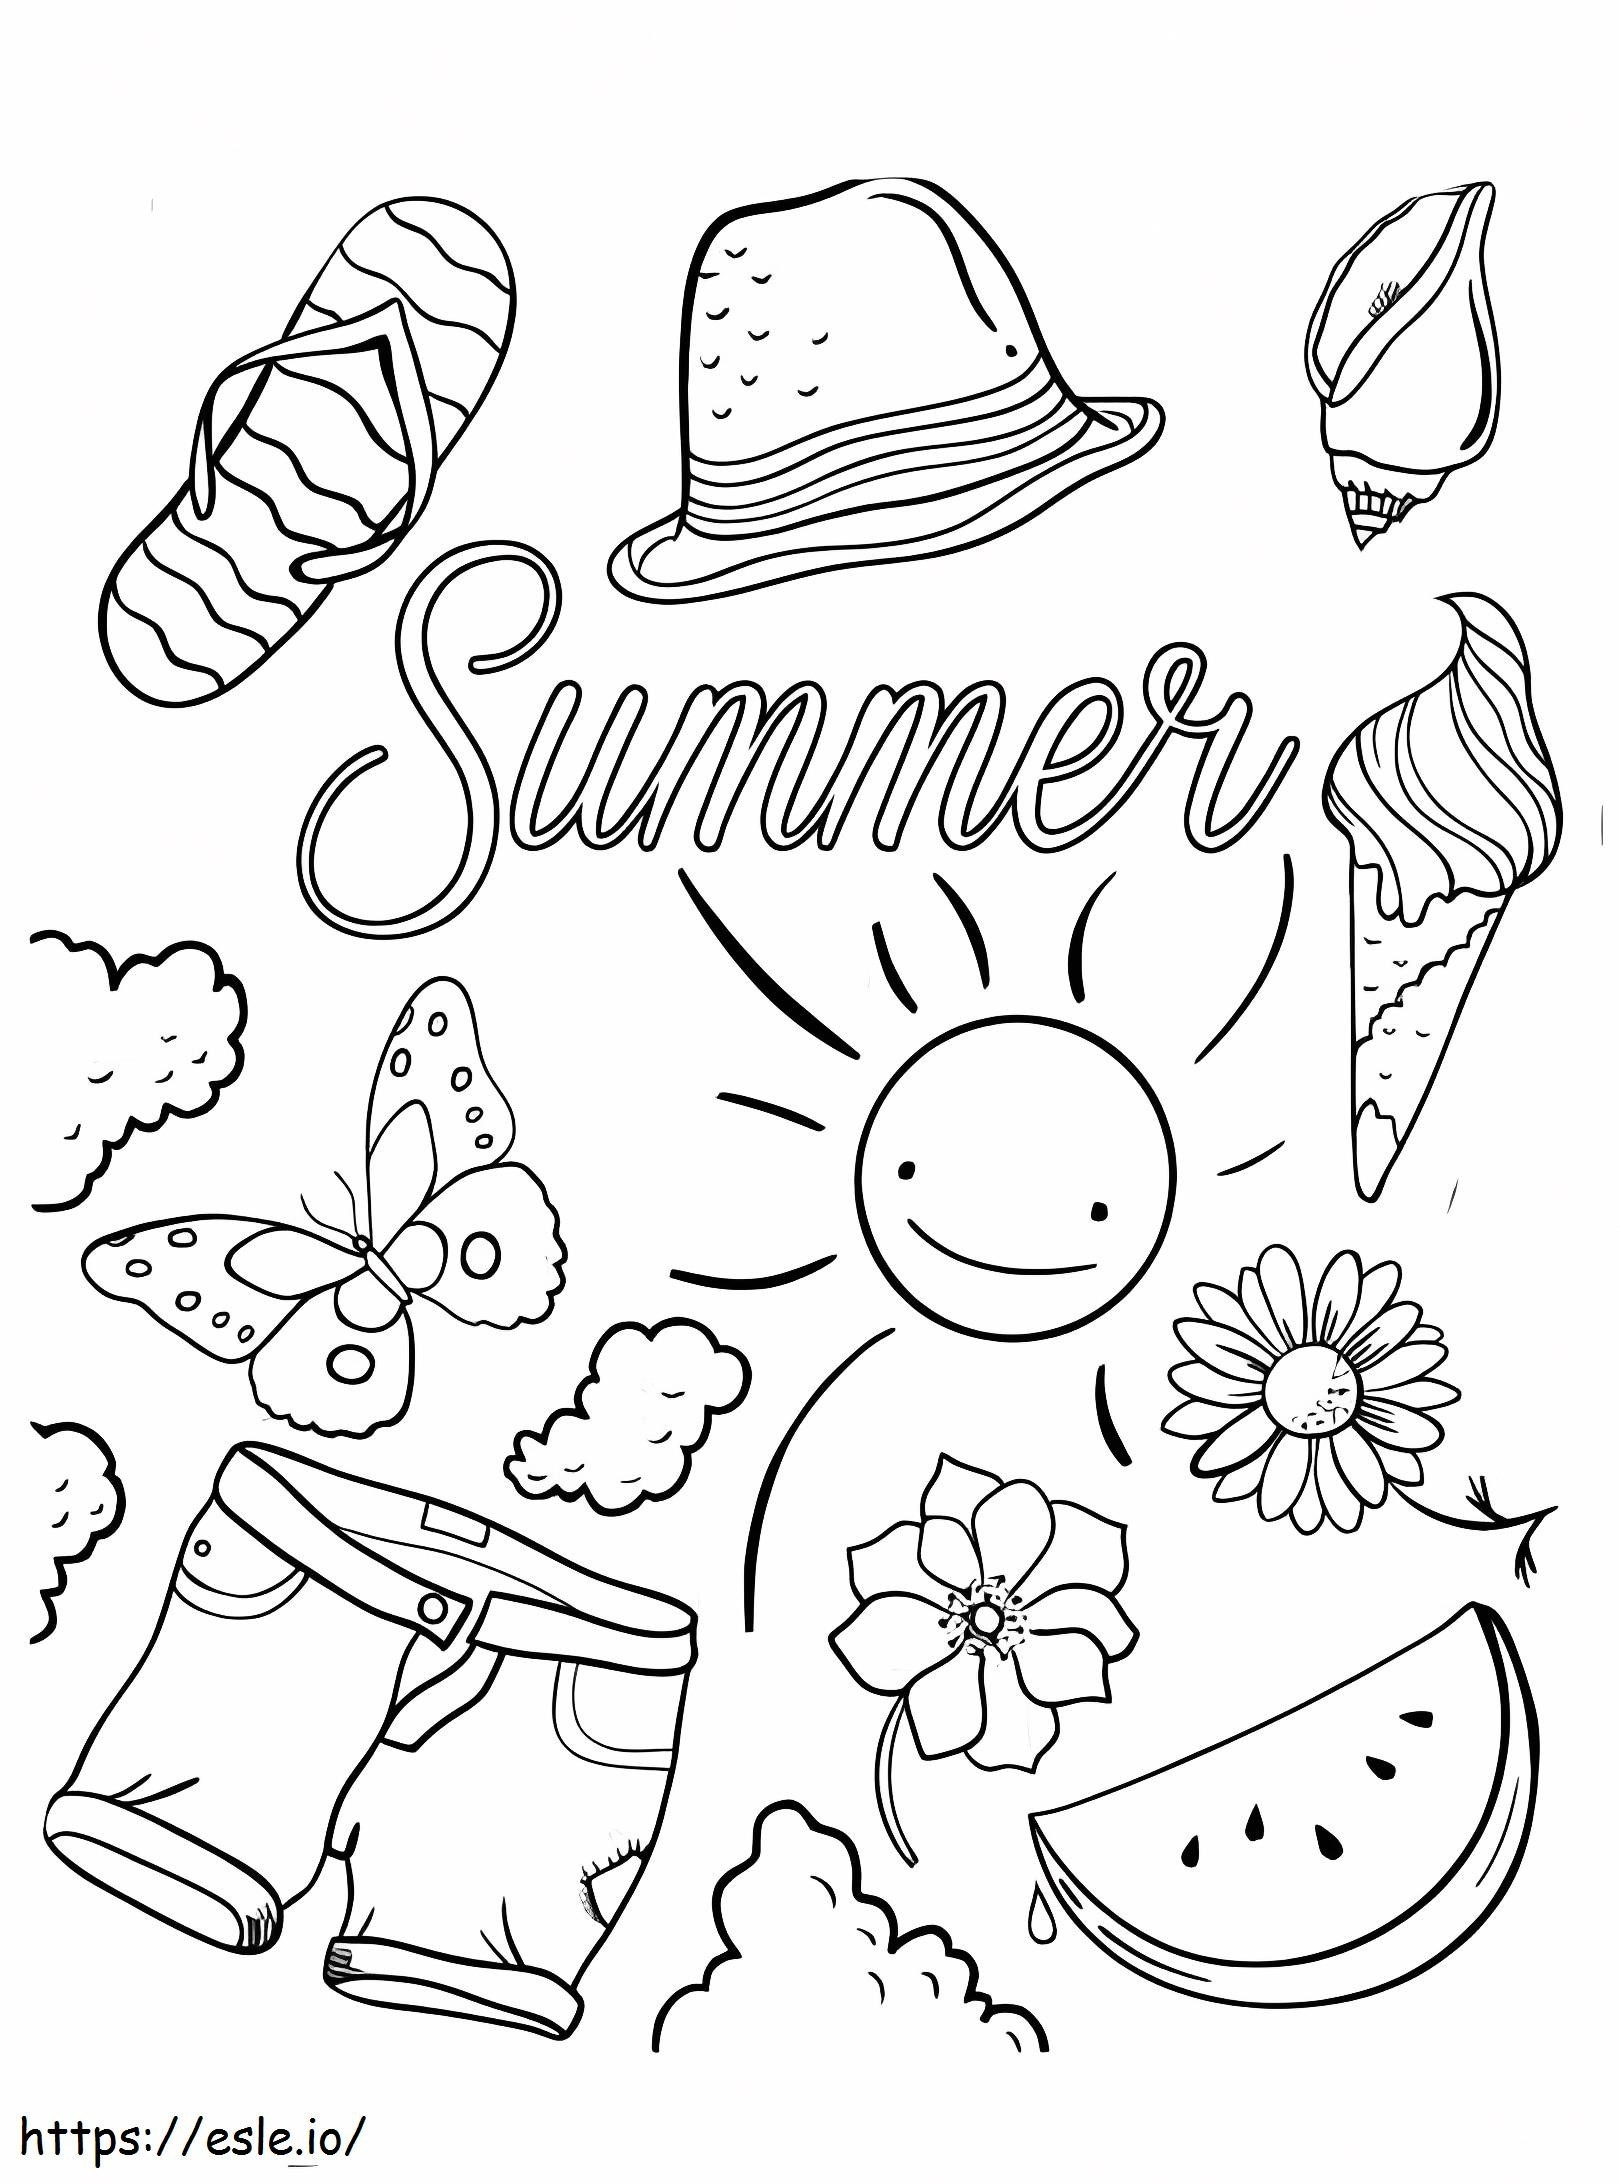 Summer 3 coloring page